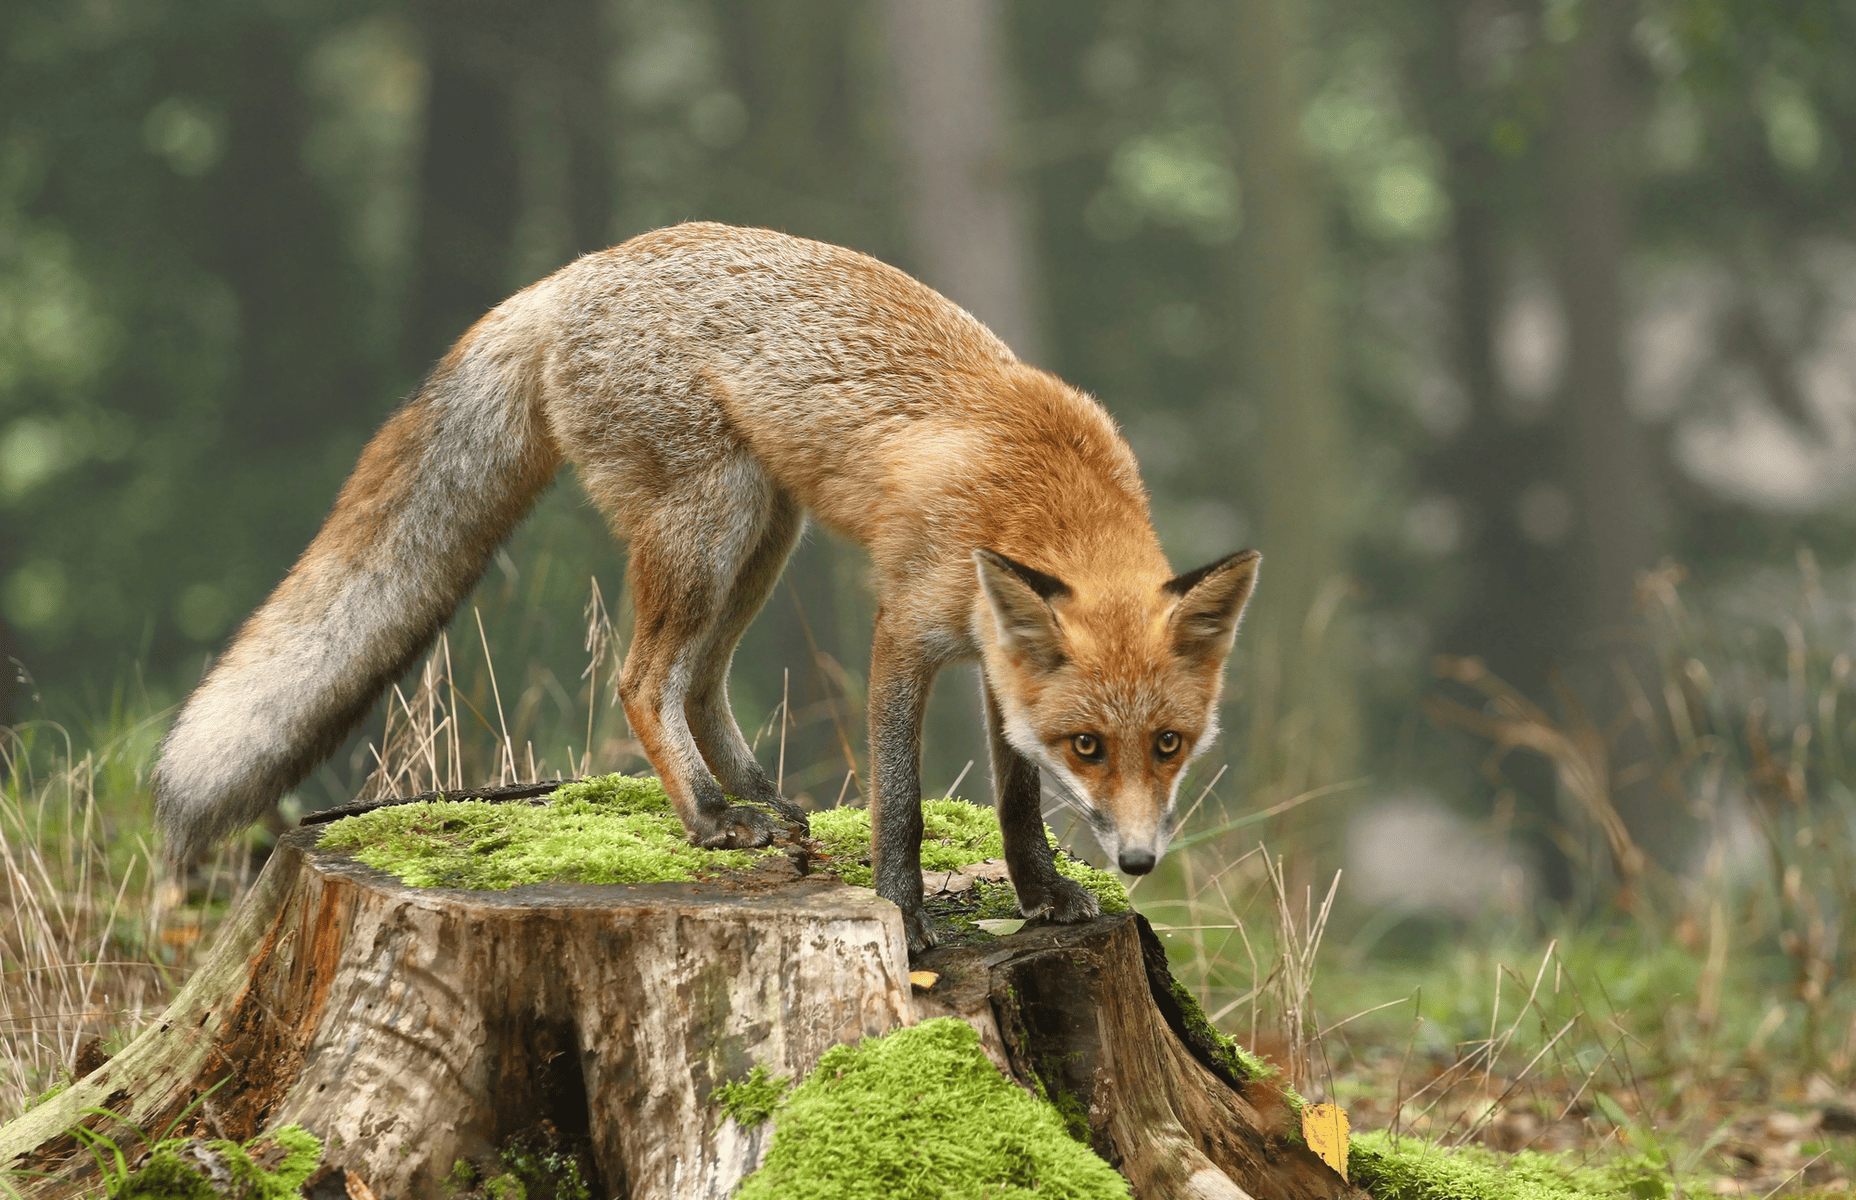 A fox in nature.